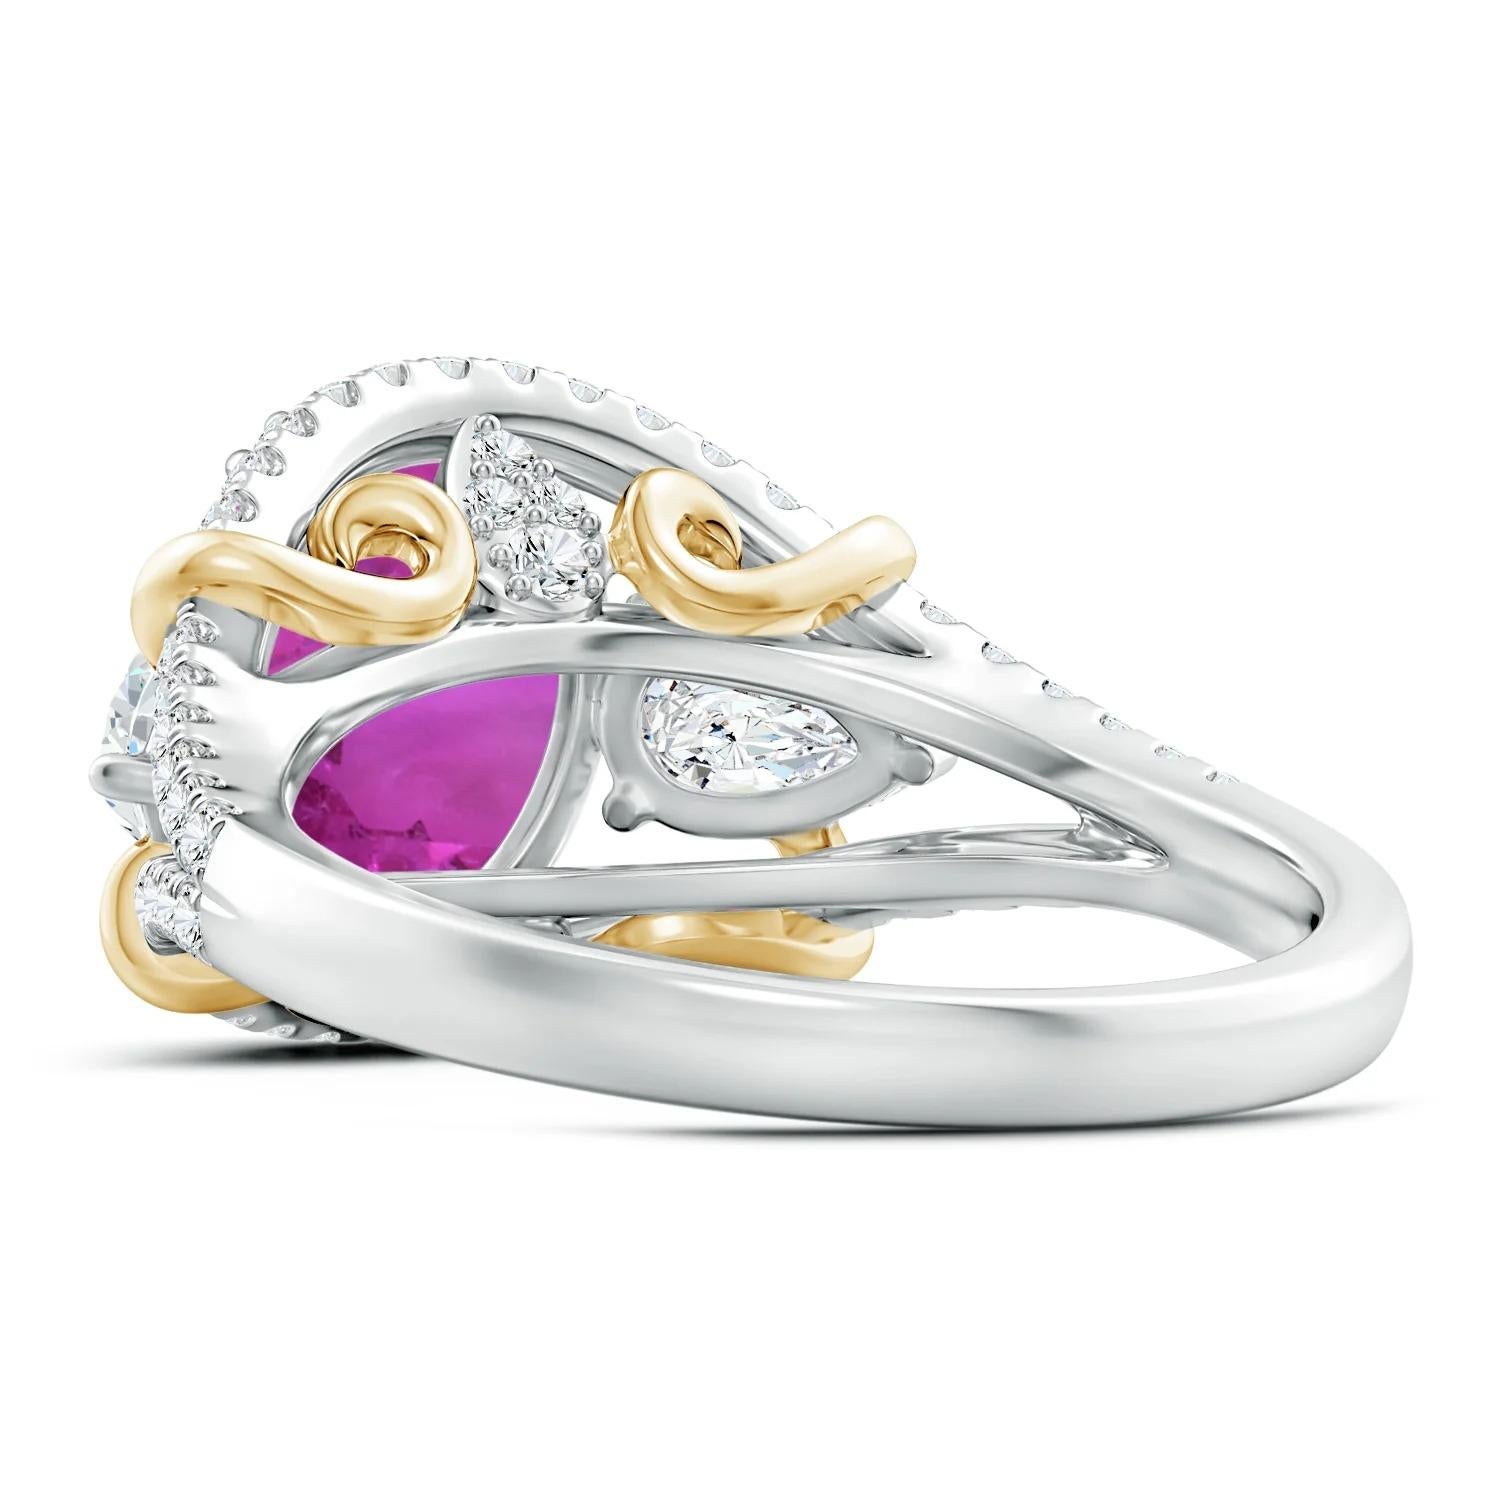 For Sale:  GIA Certified Natural Pink Sapphire Ring in Yellow Gold with Diamonds 4